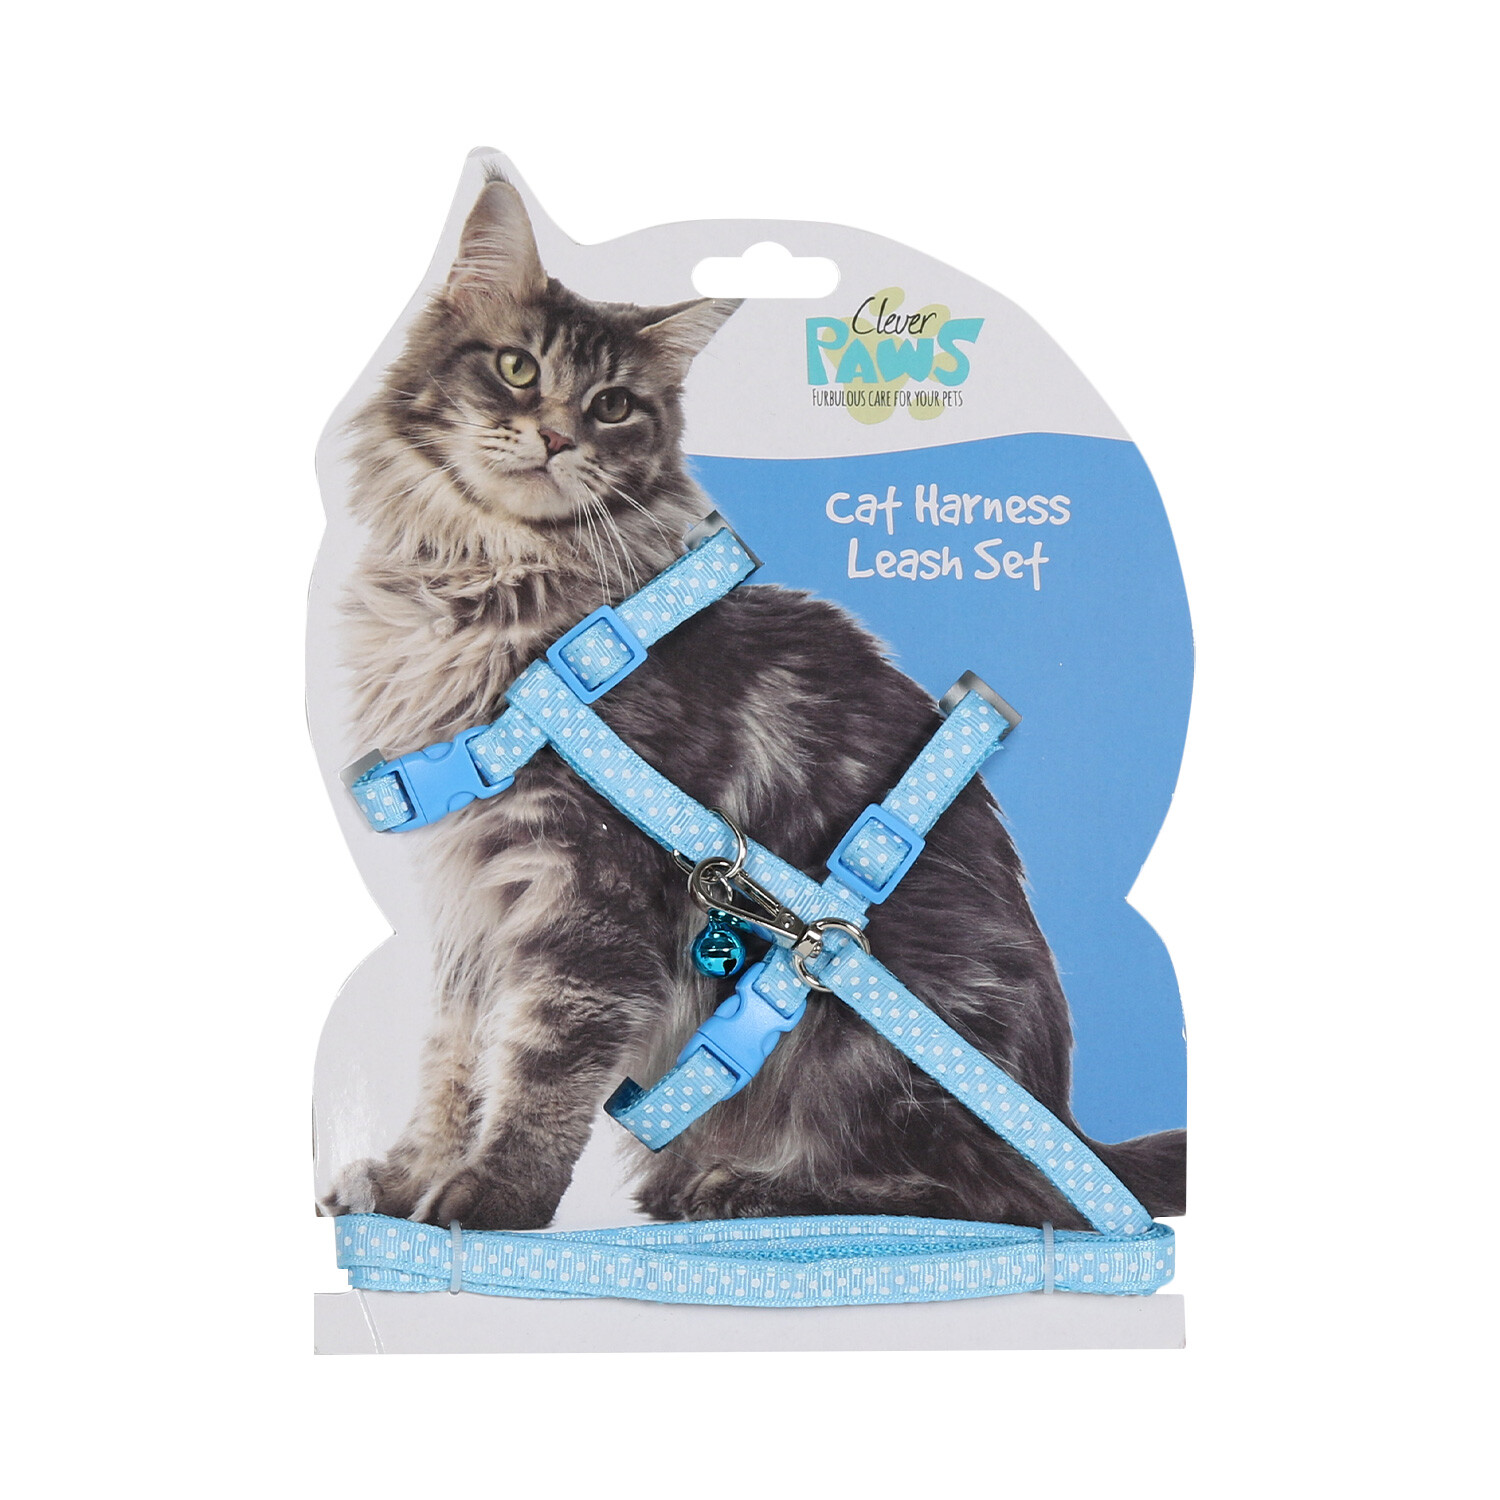 Cat Harness and Leash Set - Blue Image